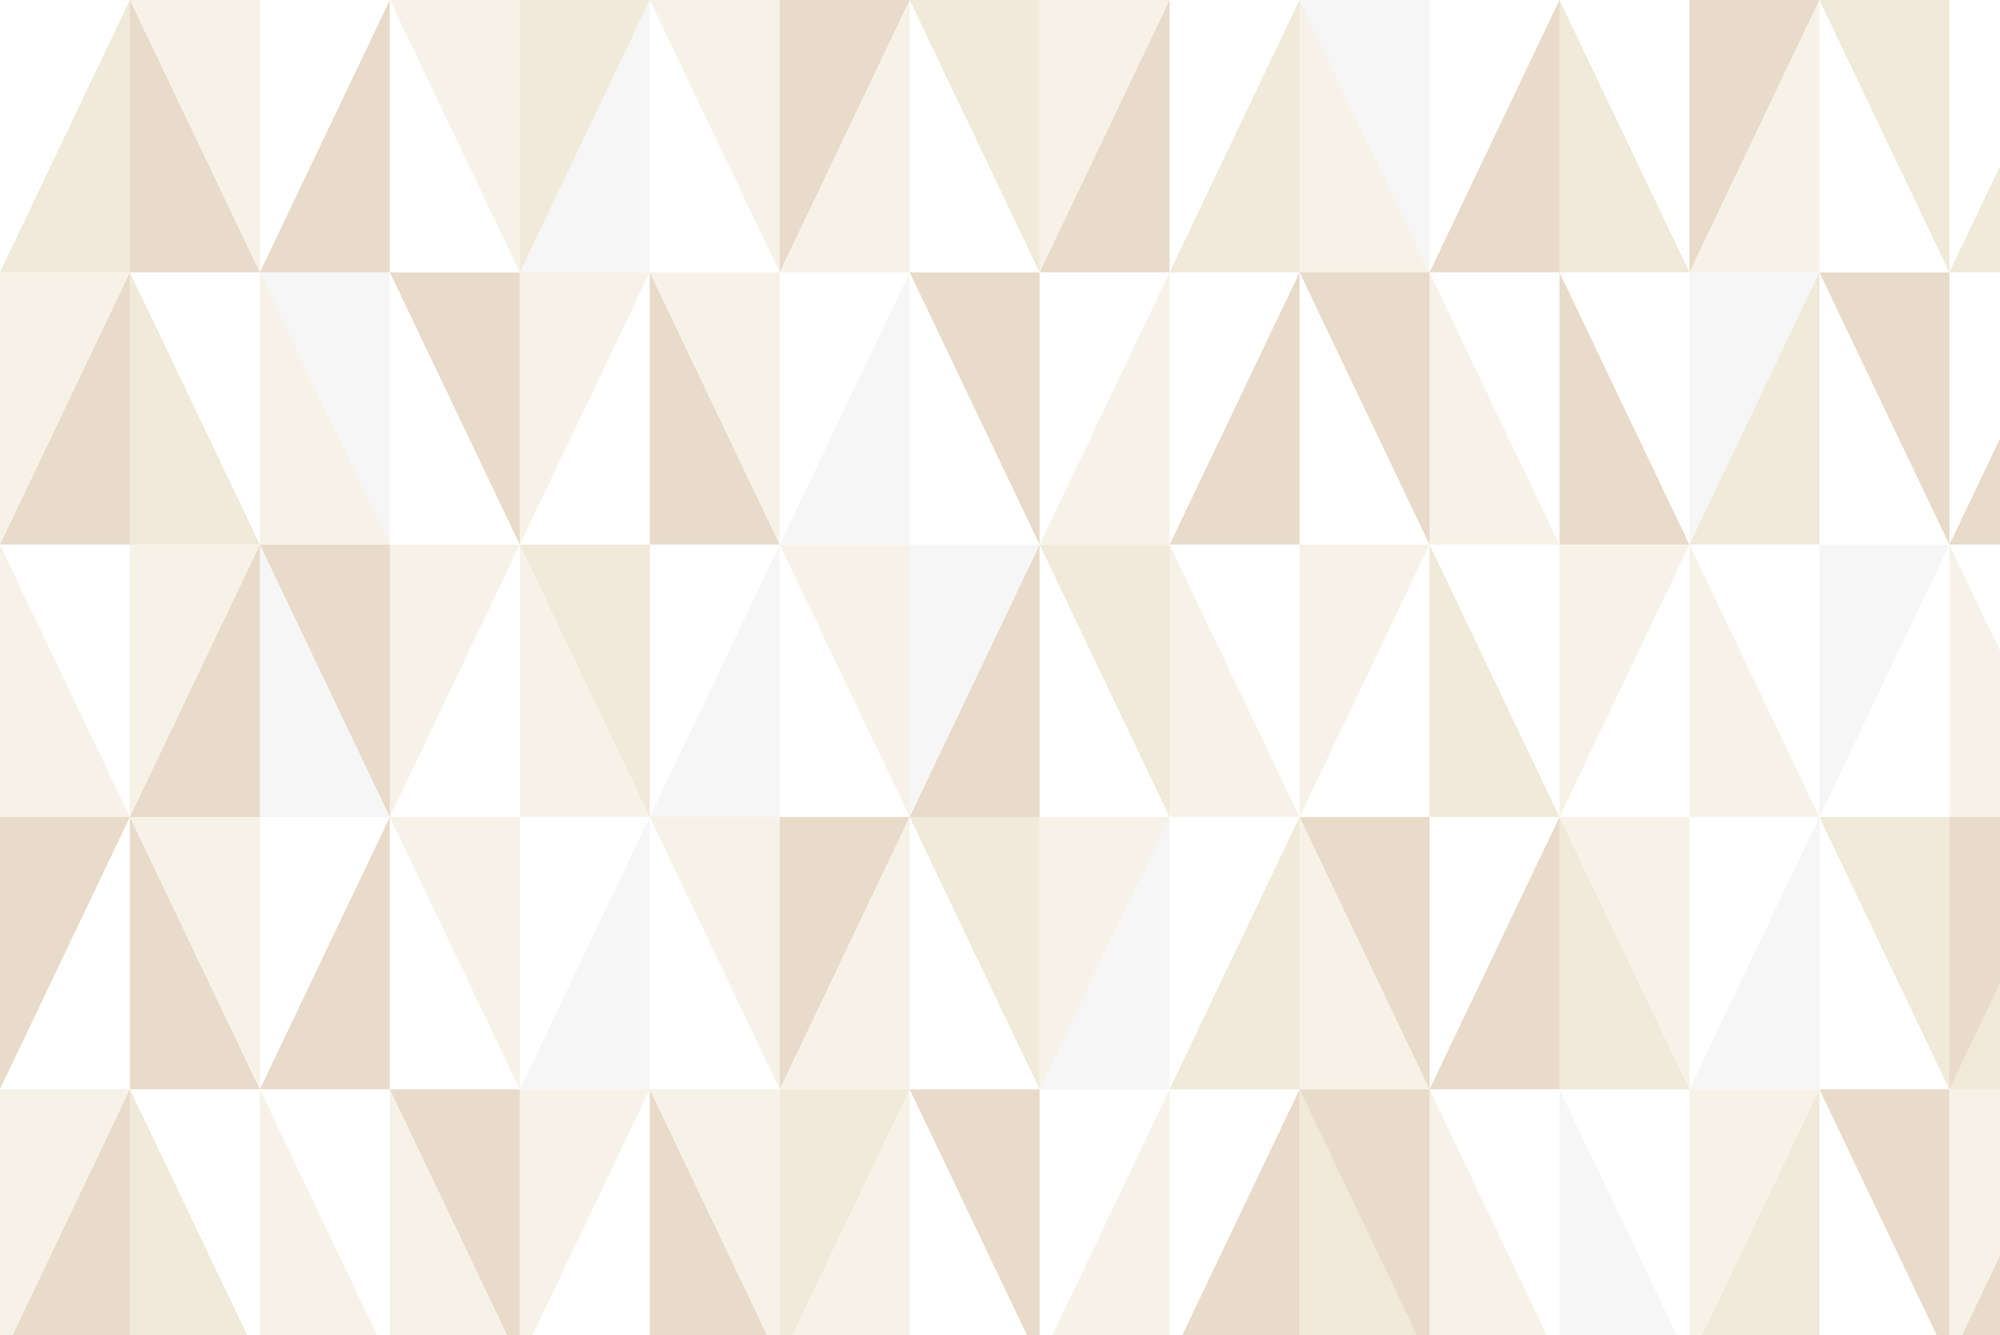             Design wall mural with small triangles beige on mother of pearl smooth nonwoven
        